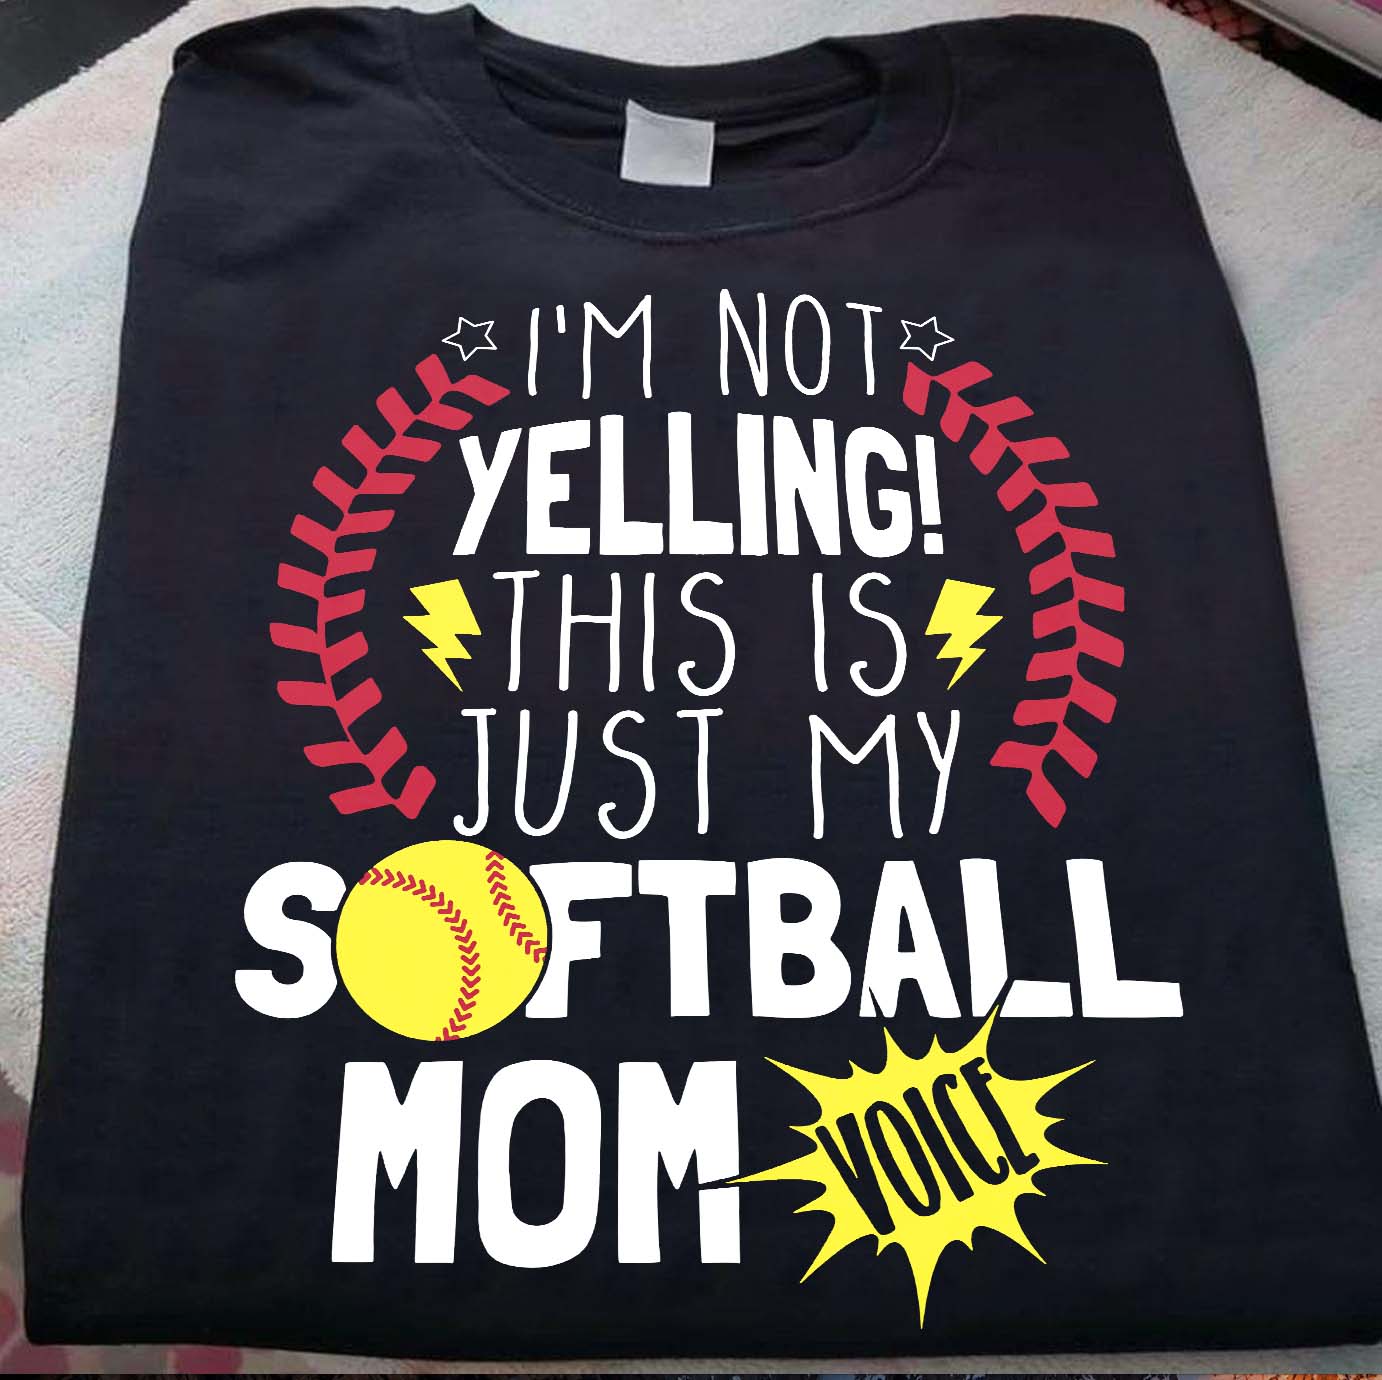 I'm not yellin this is just my softball mom voice - Mother's day gift